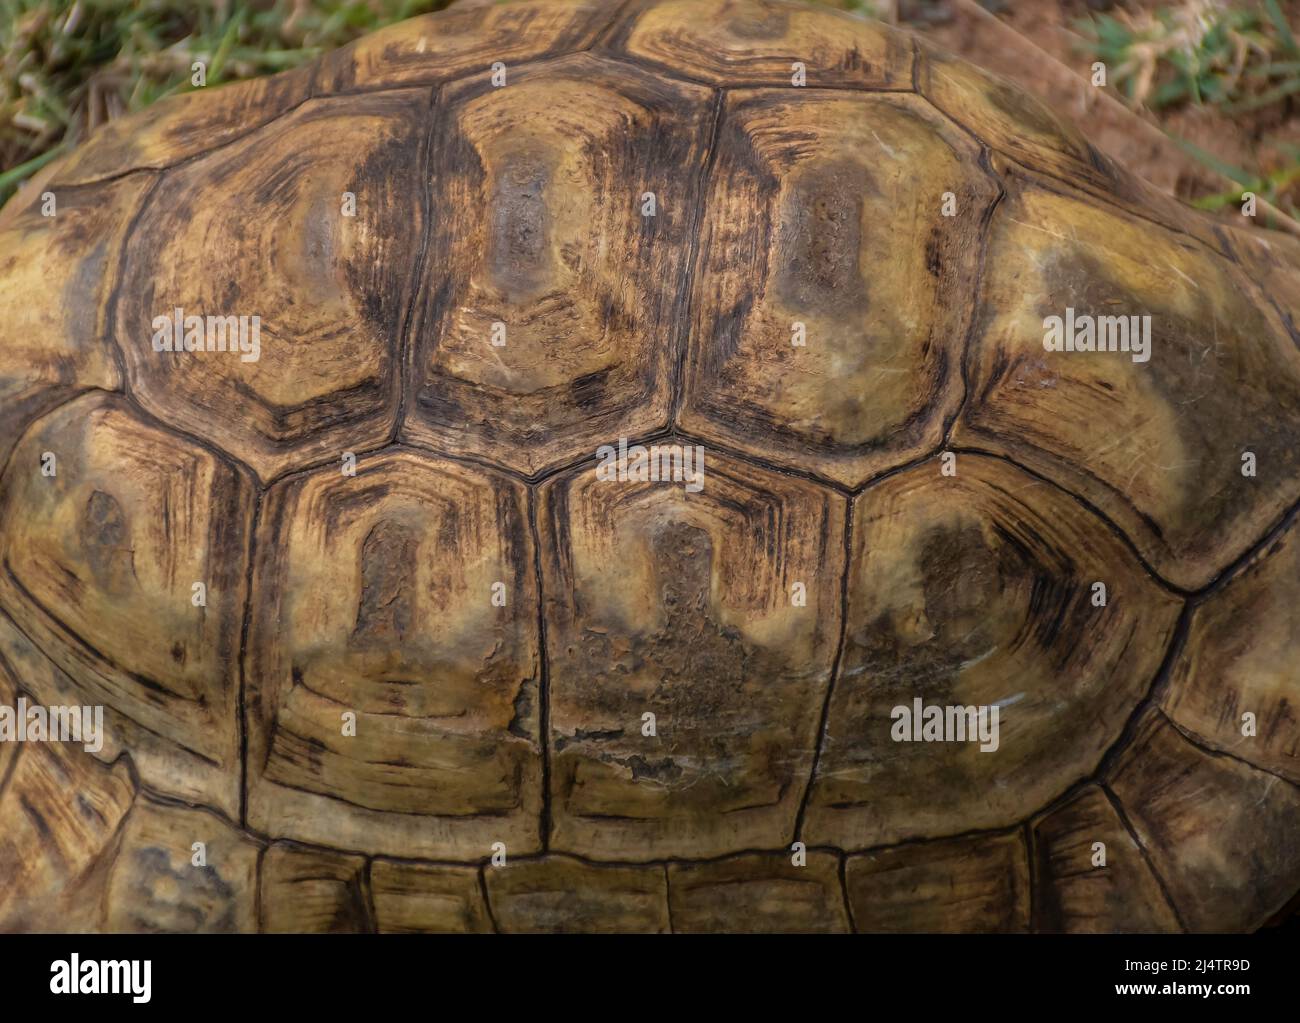 Leopard tortoise with hard shell in africa Stock Photo